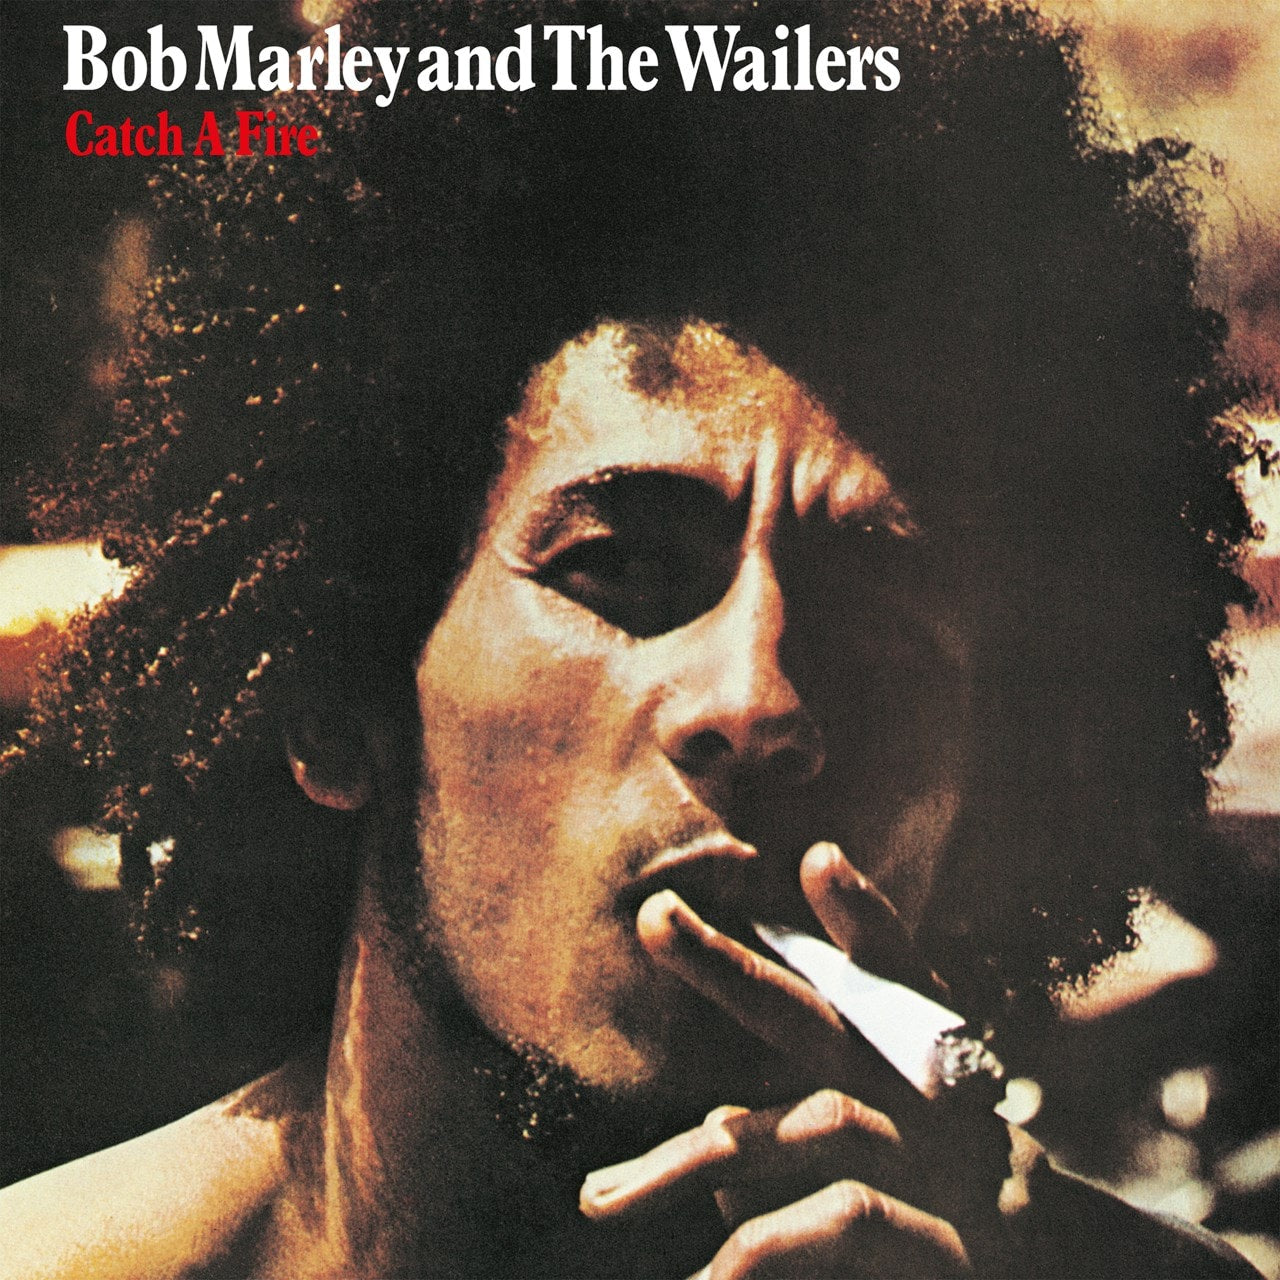 BOB MARLEY AND THE WAILERS - CATCH A FIRE 50TH ANNIVERSARY EDITION